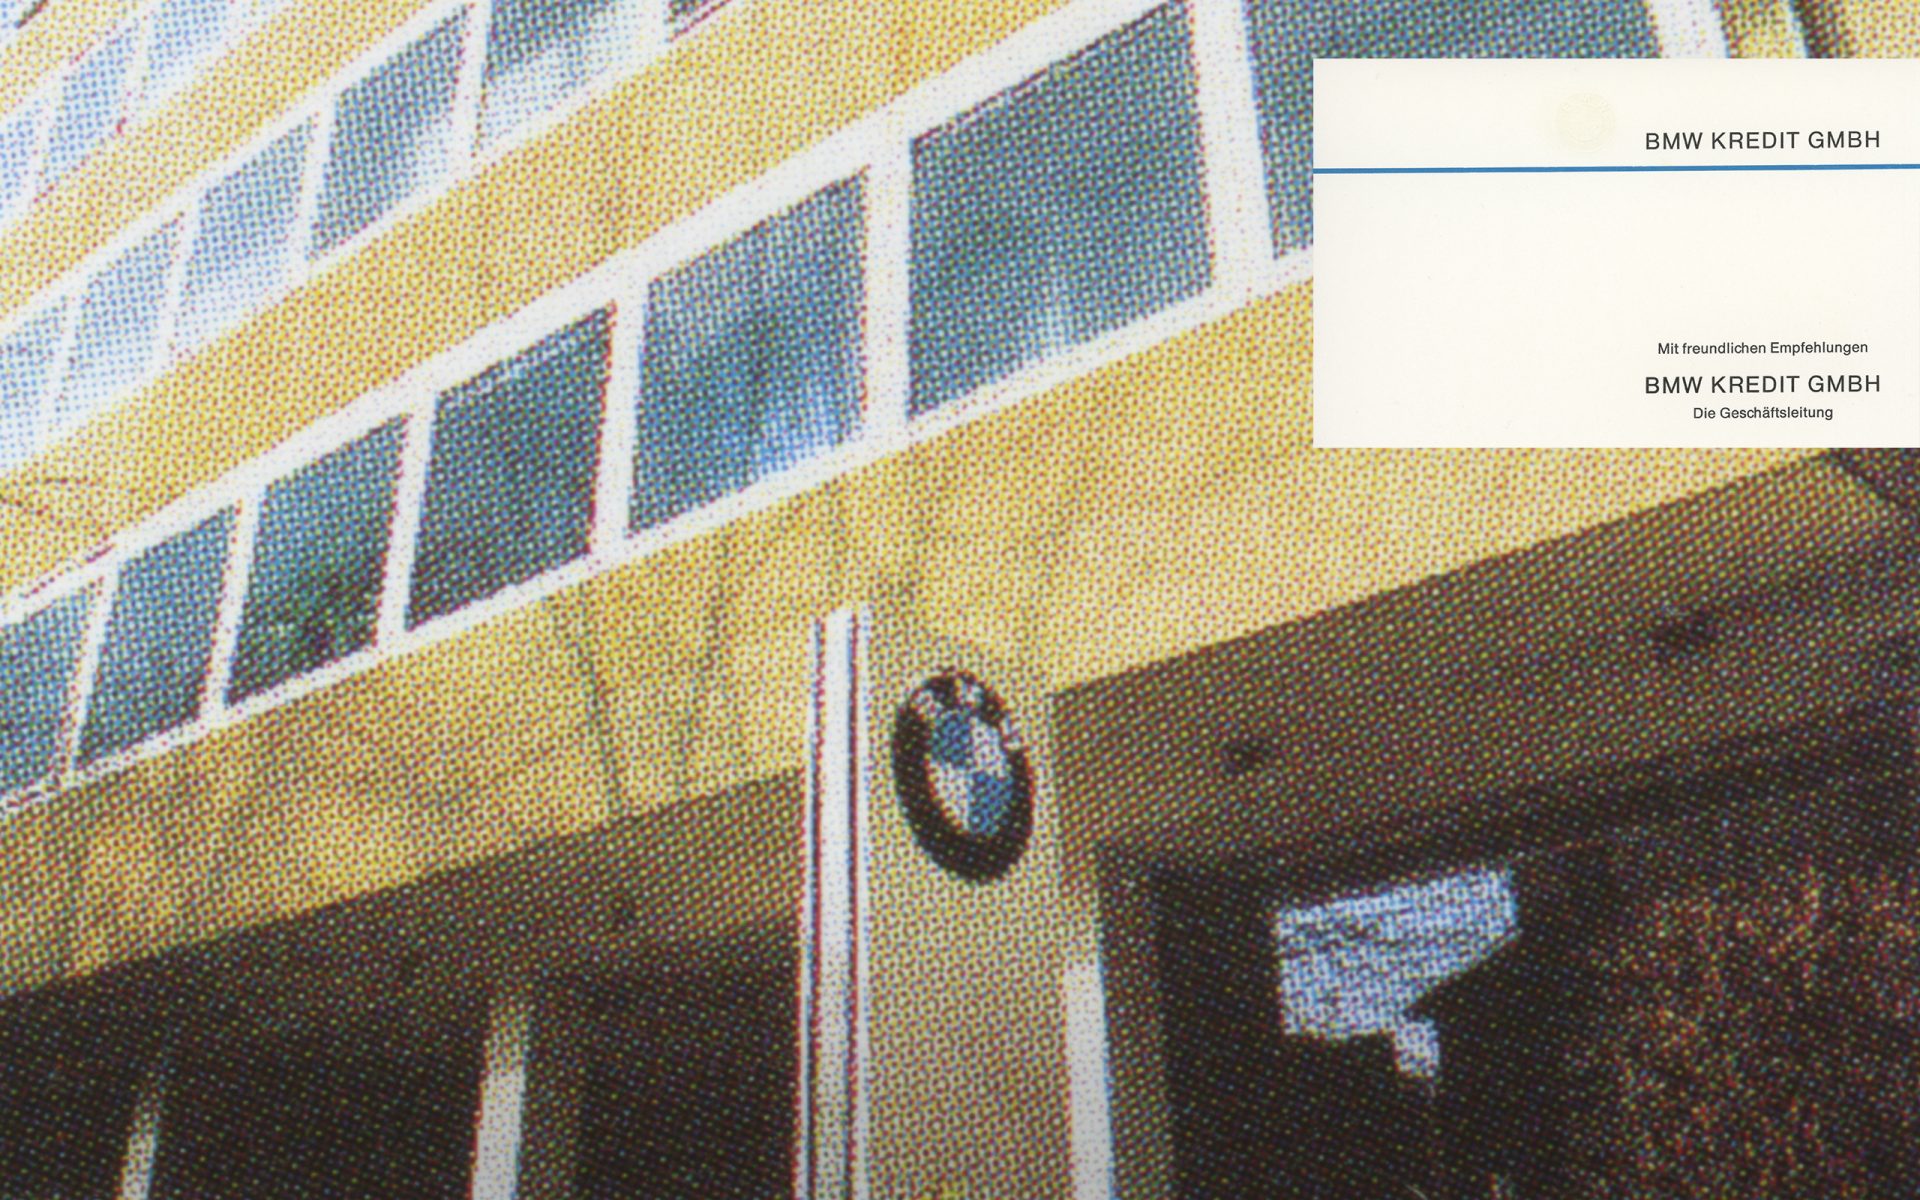 BMW Kredit GmbH opens for business.